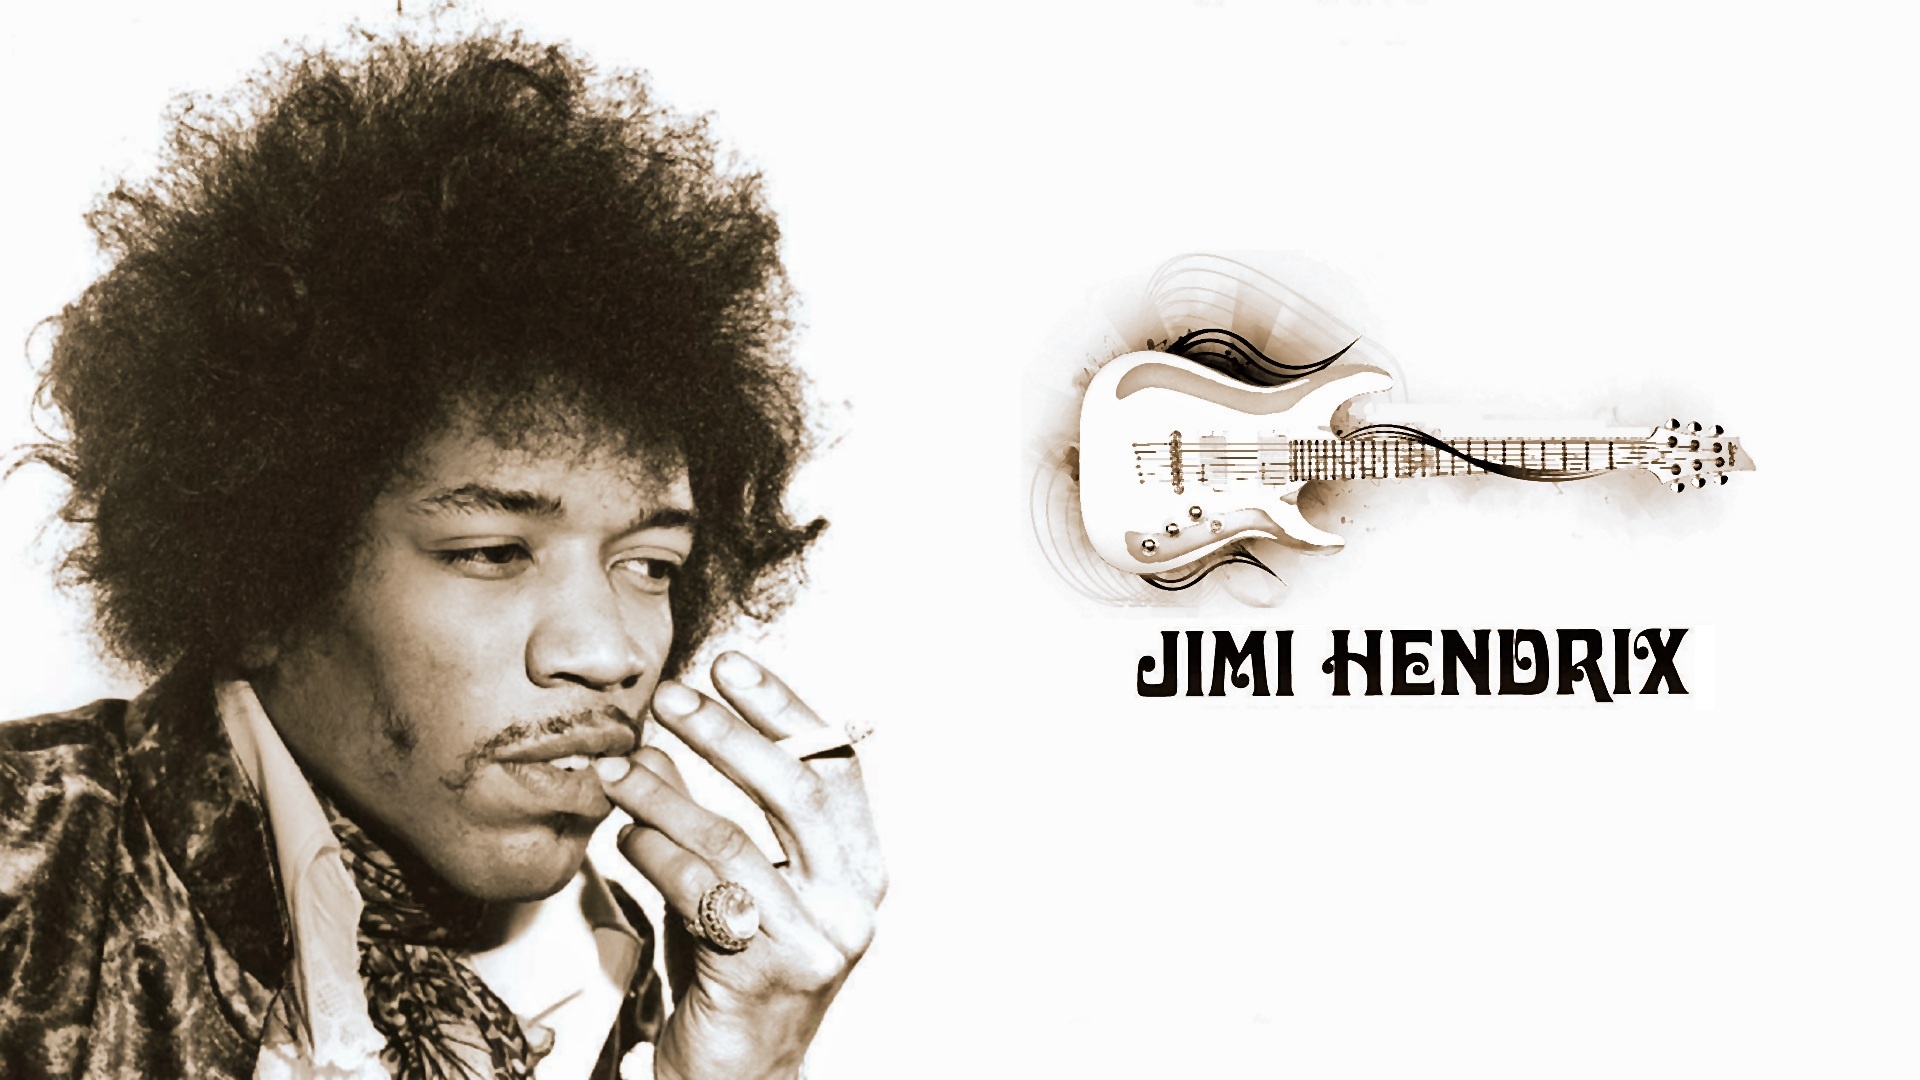 Jimi Hendrix, Free download wallpapers, Graphics, High-resolution images, 1920x1080 Full HD Desktop